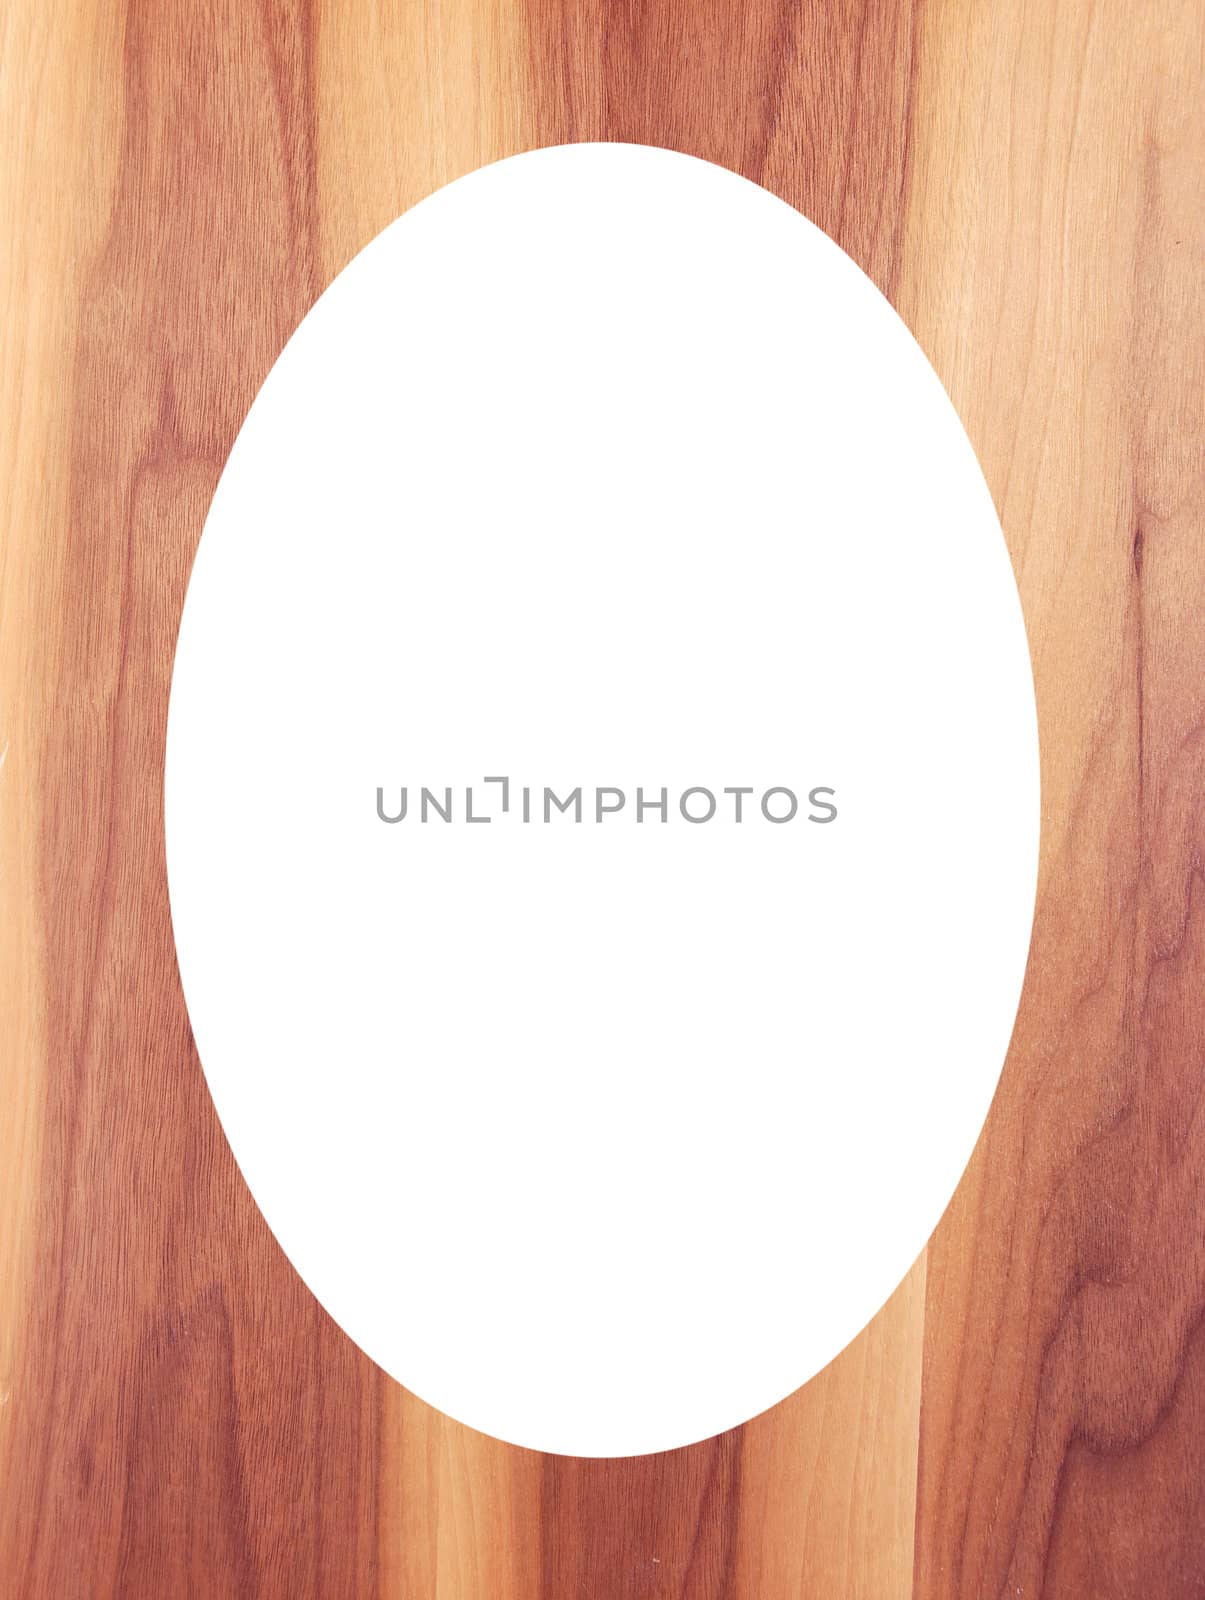 Wooden floor background and white oval in center by sauletas